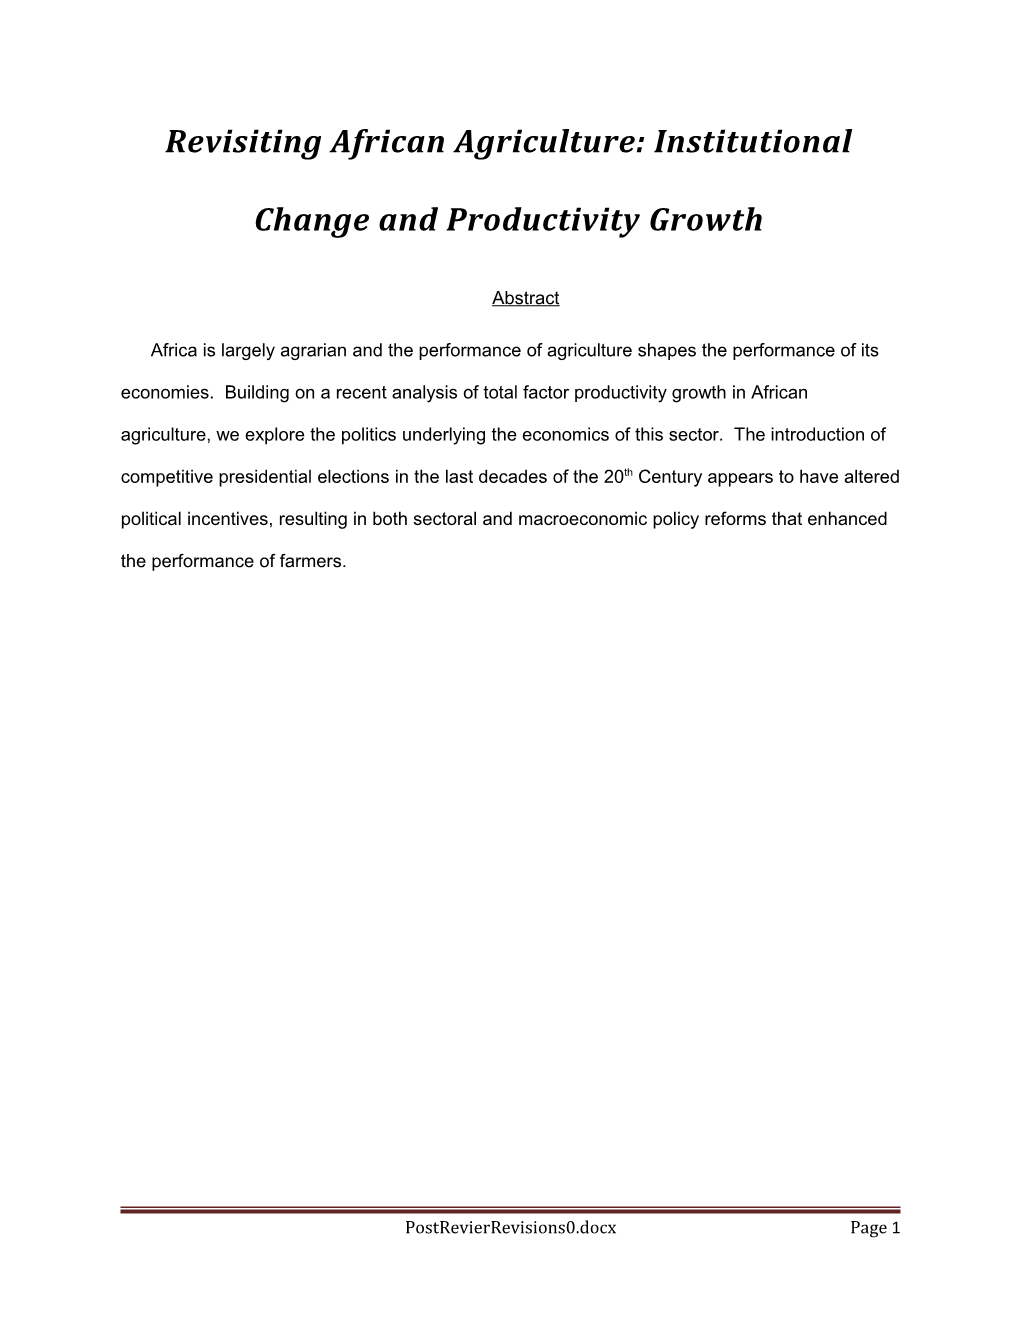 Revisiting African Agriculture: Institutional Change and Productivity Growth